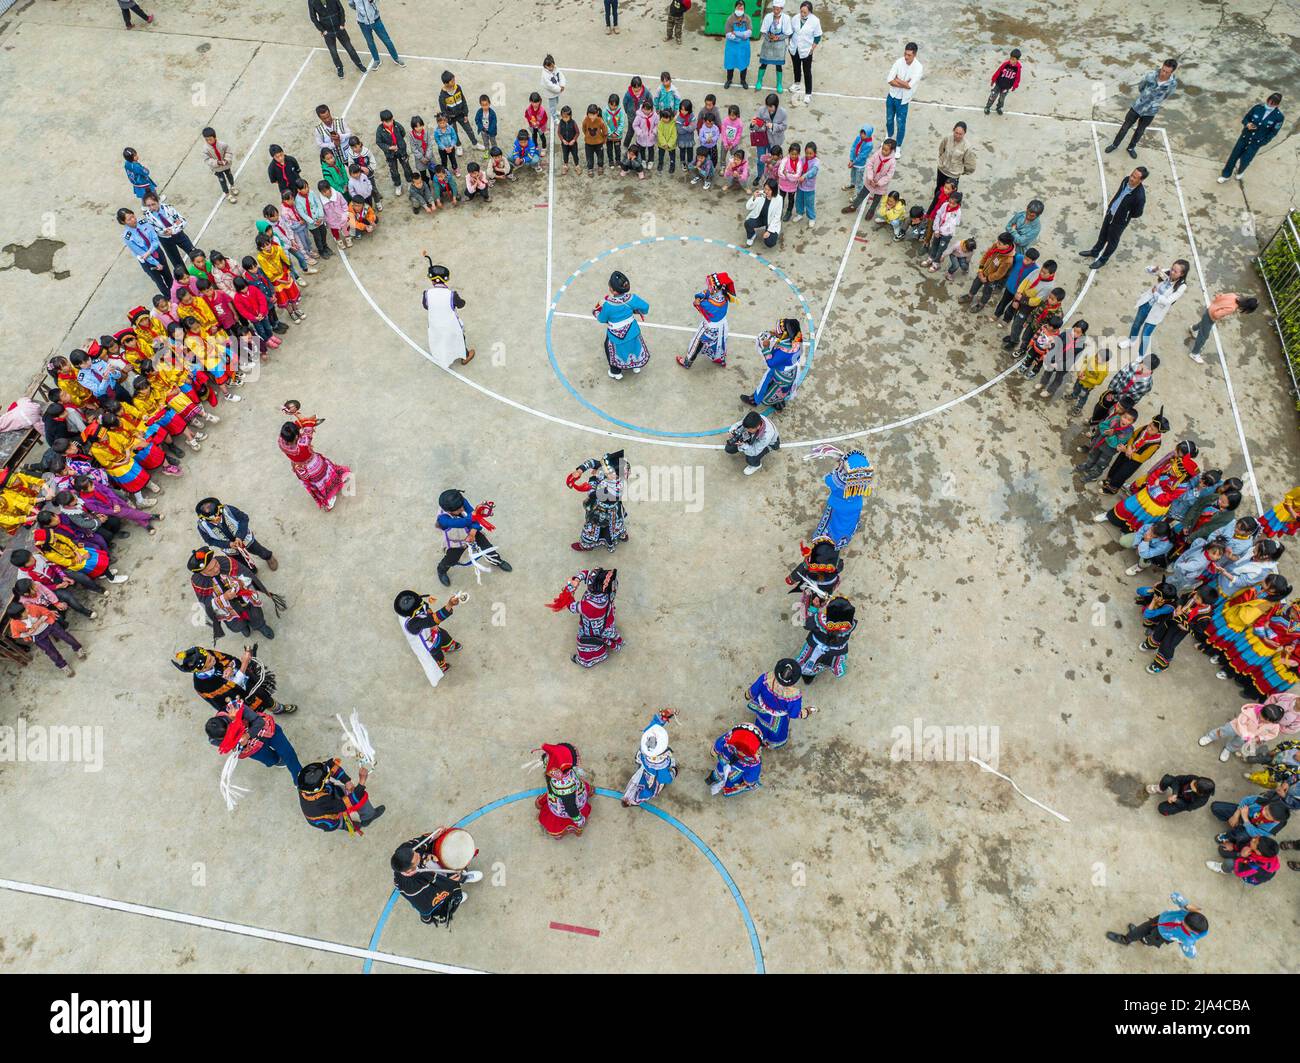 BIJIE, CHINA - MAY 27, 2022 - Villagers of yi ethnic group dance to celebrate international Children's Day at a primary school in Bijie, Southwest Chi Stock Photo